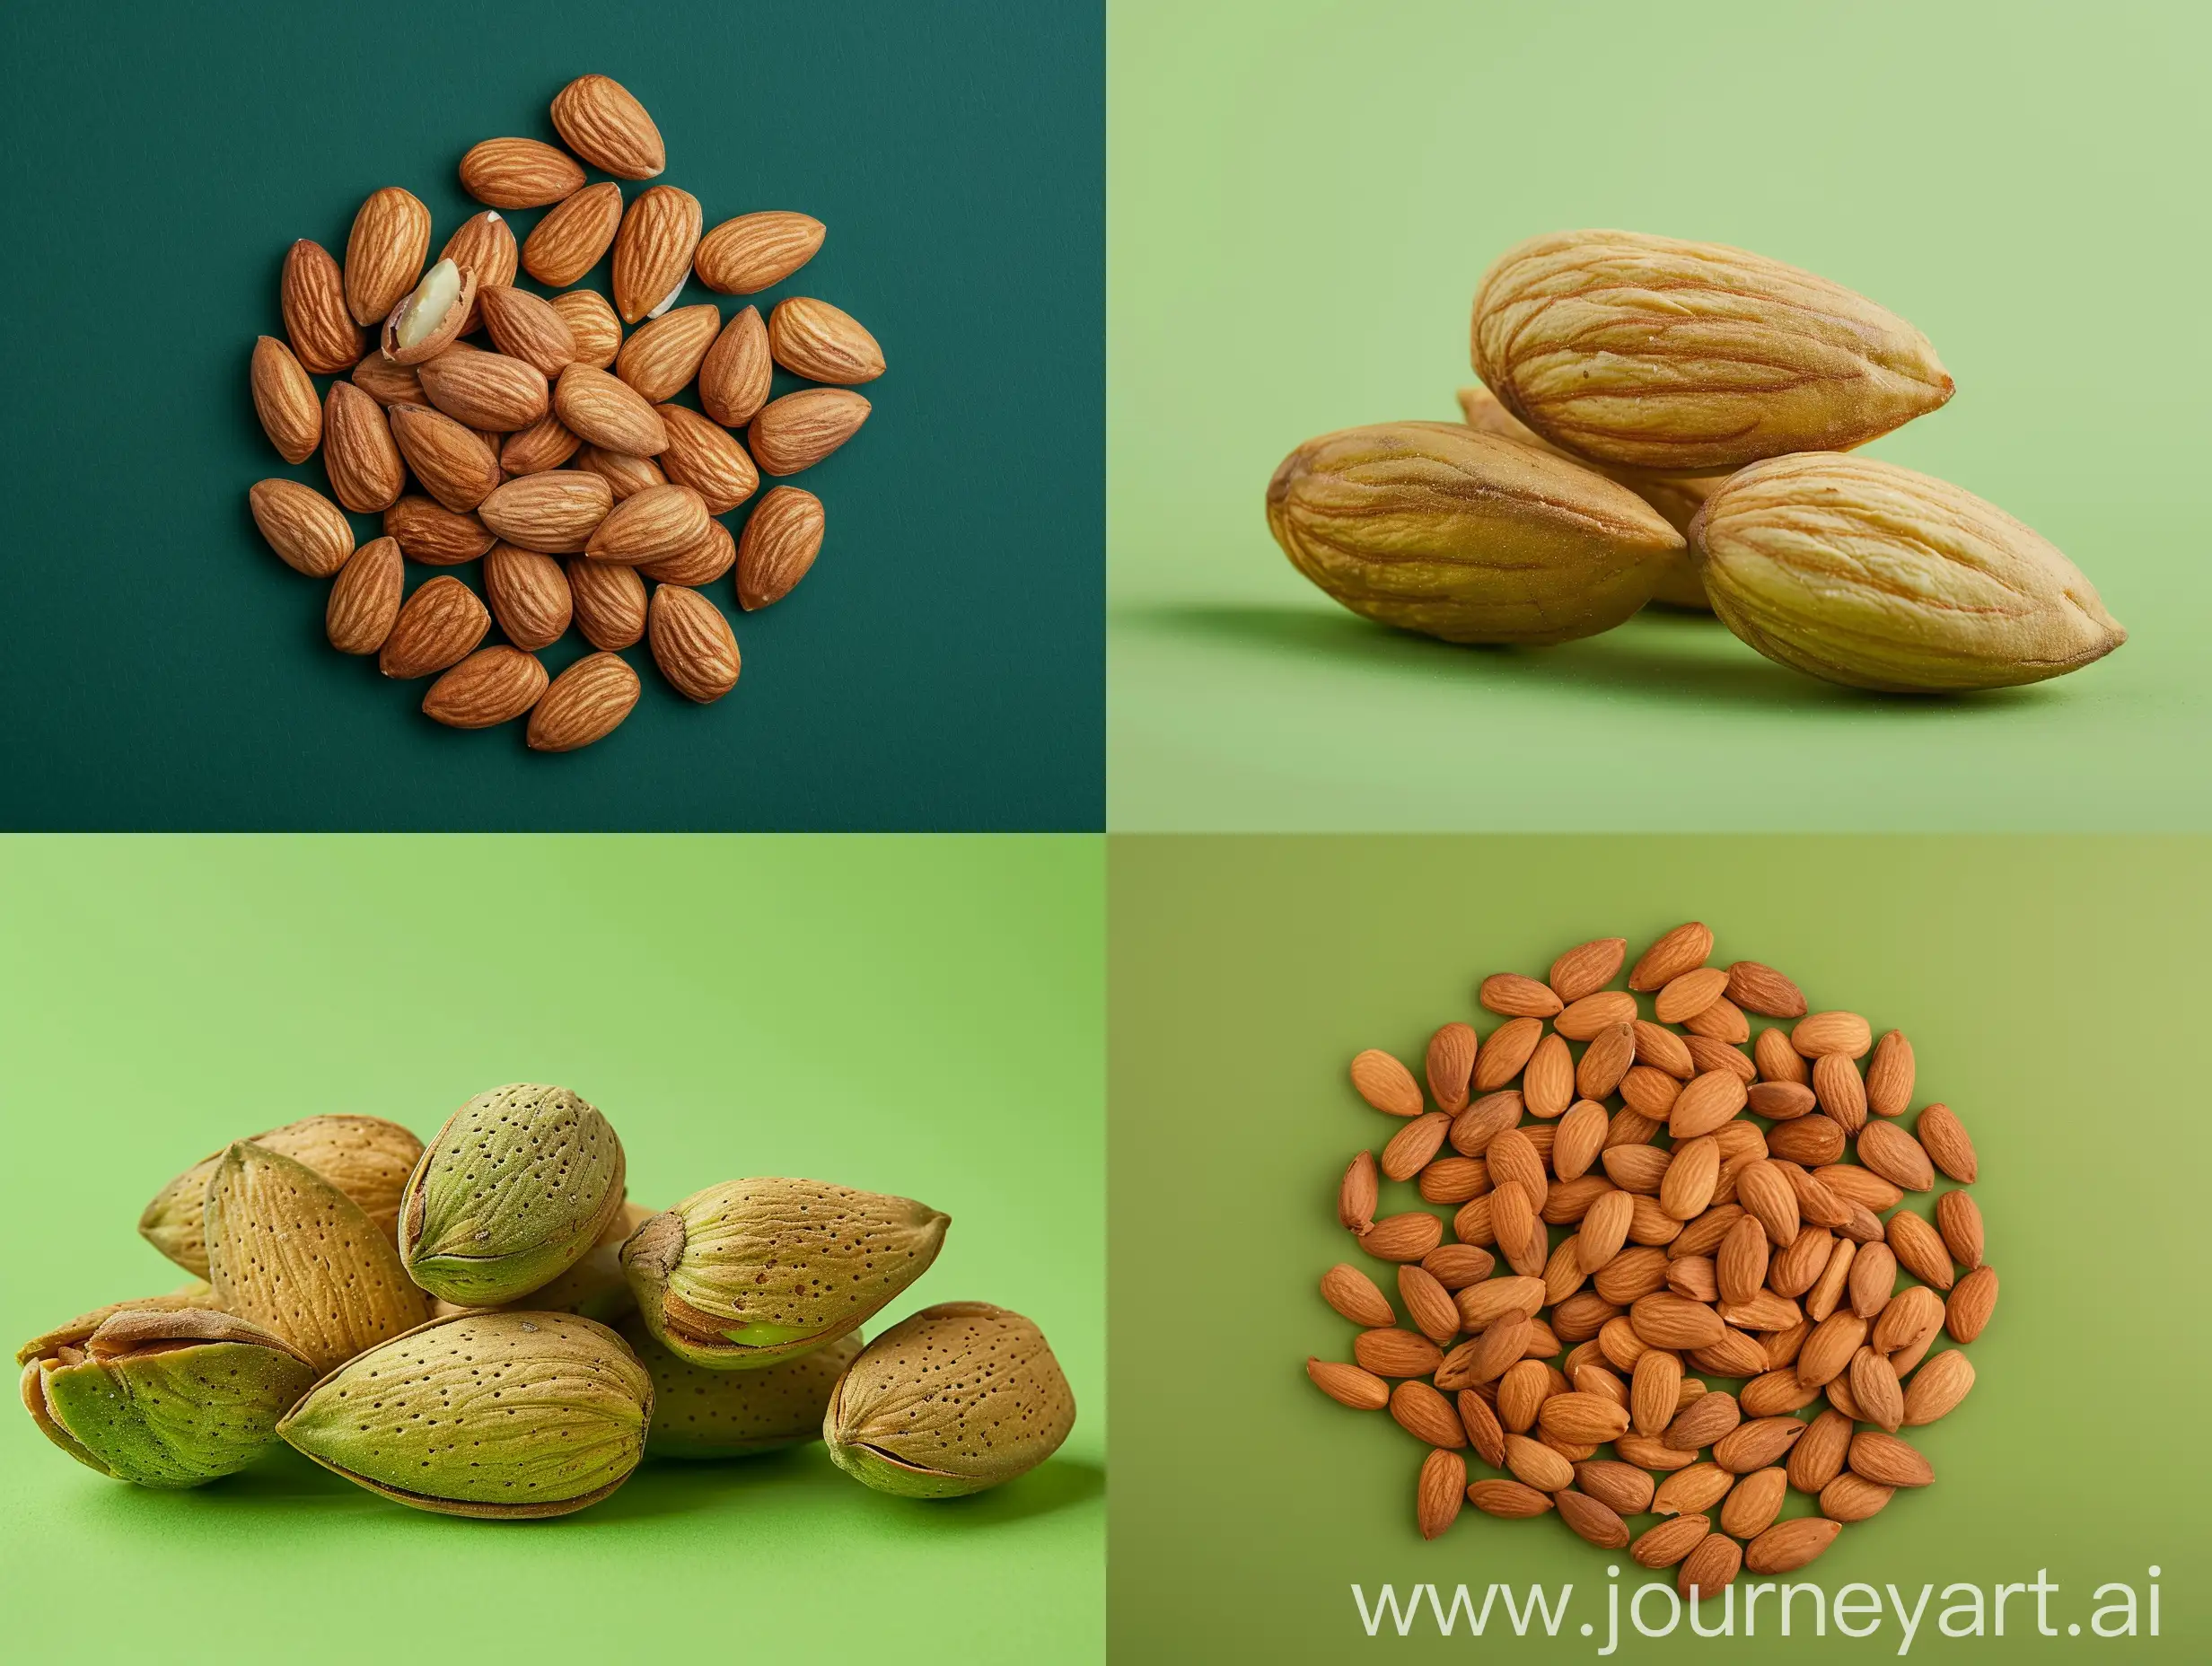 Studio photography with a background of one color of green almonds